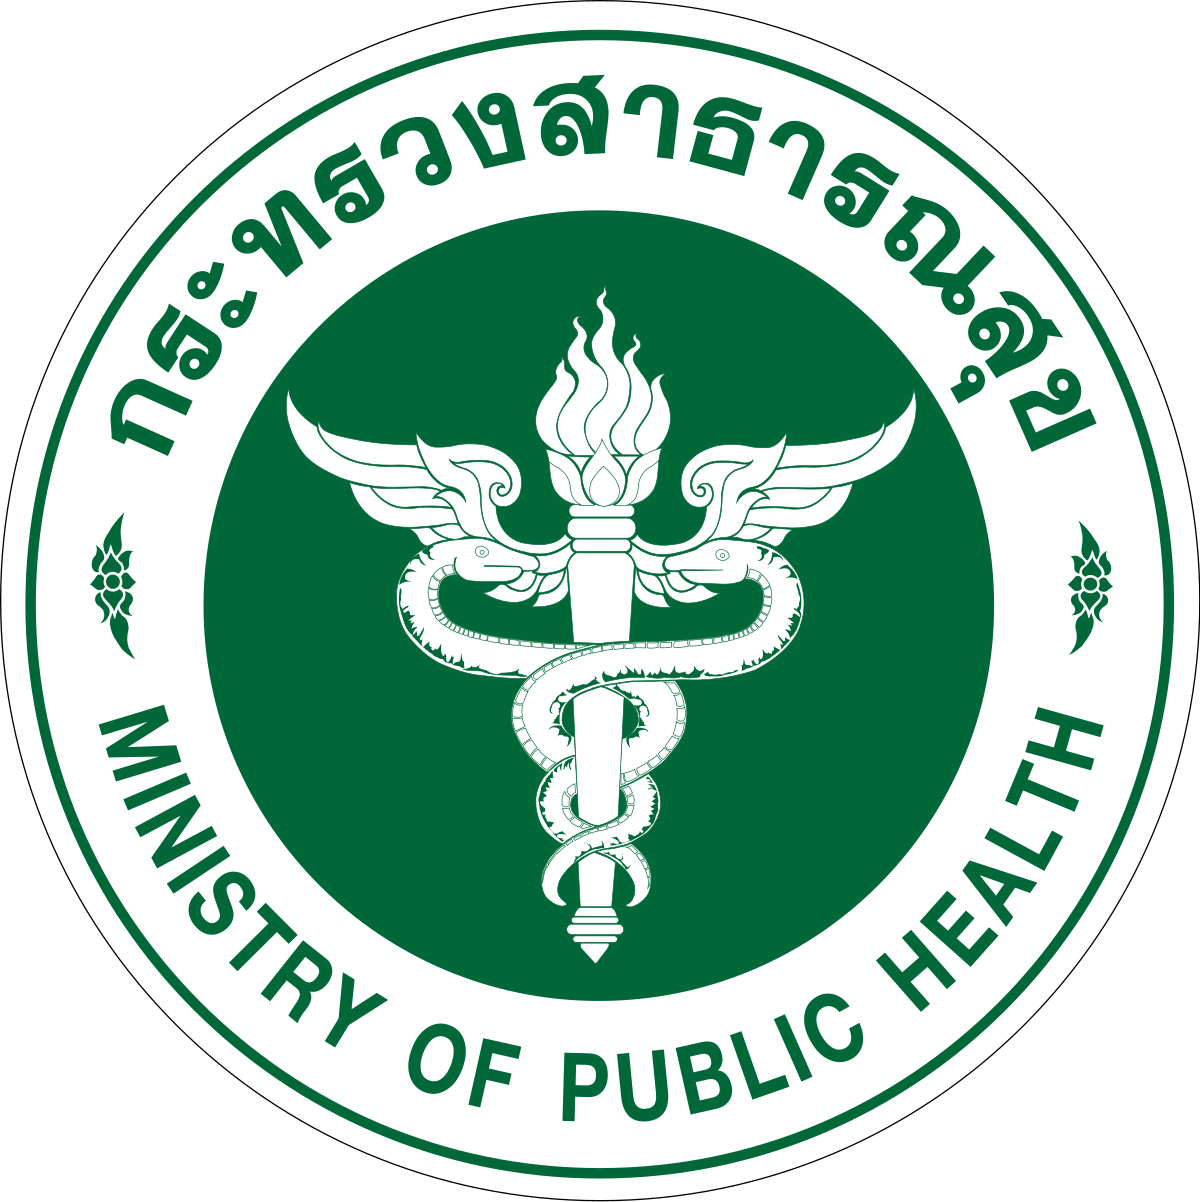 Department of Disease Control, Ministry of Public Health of Thailand